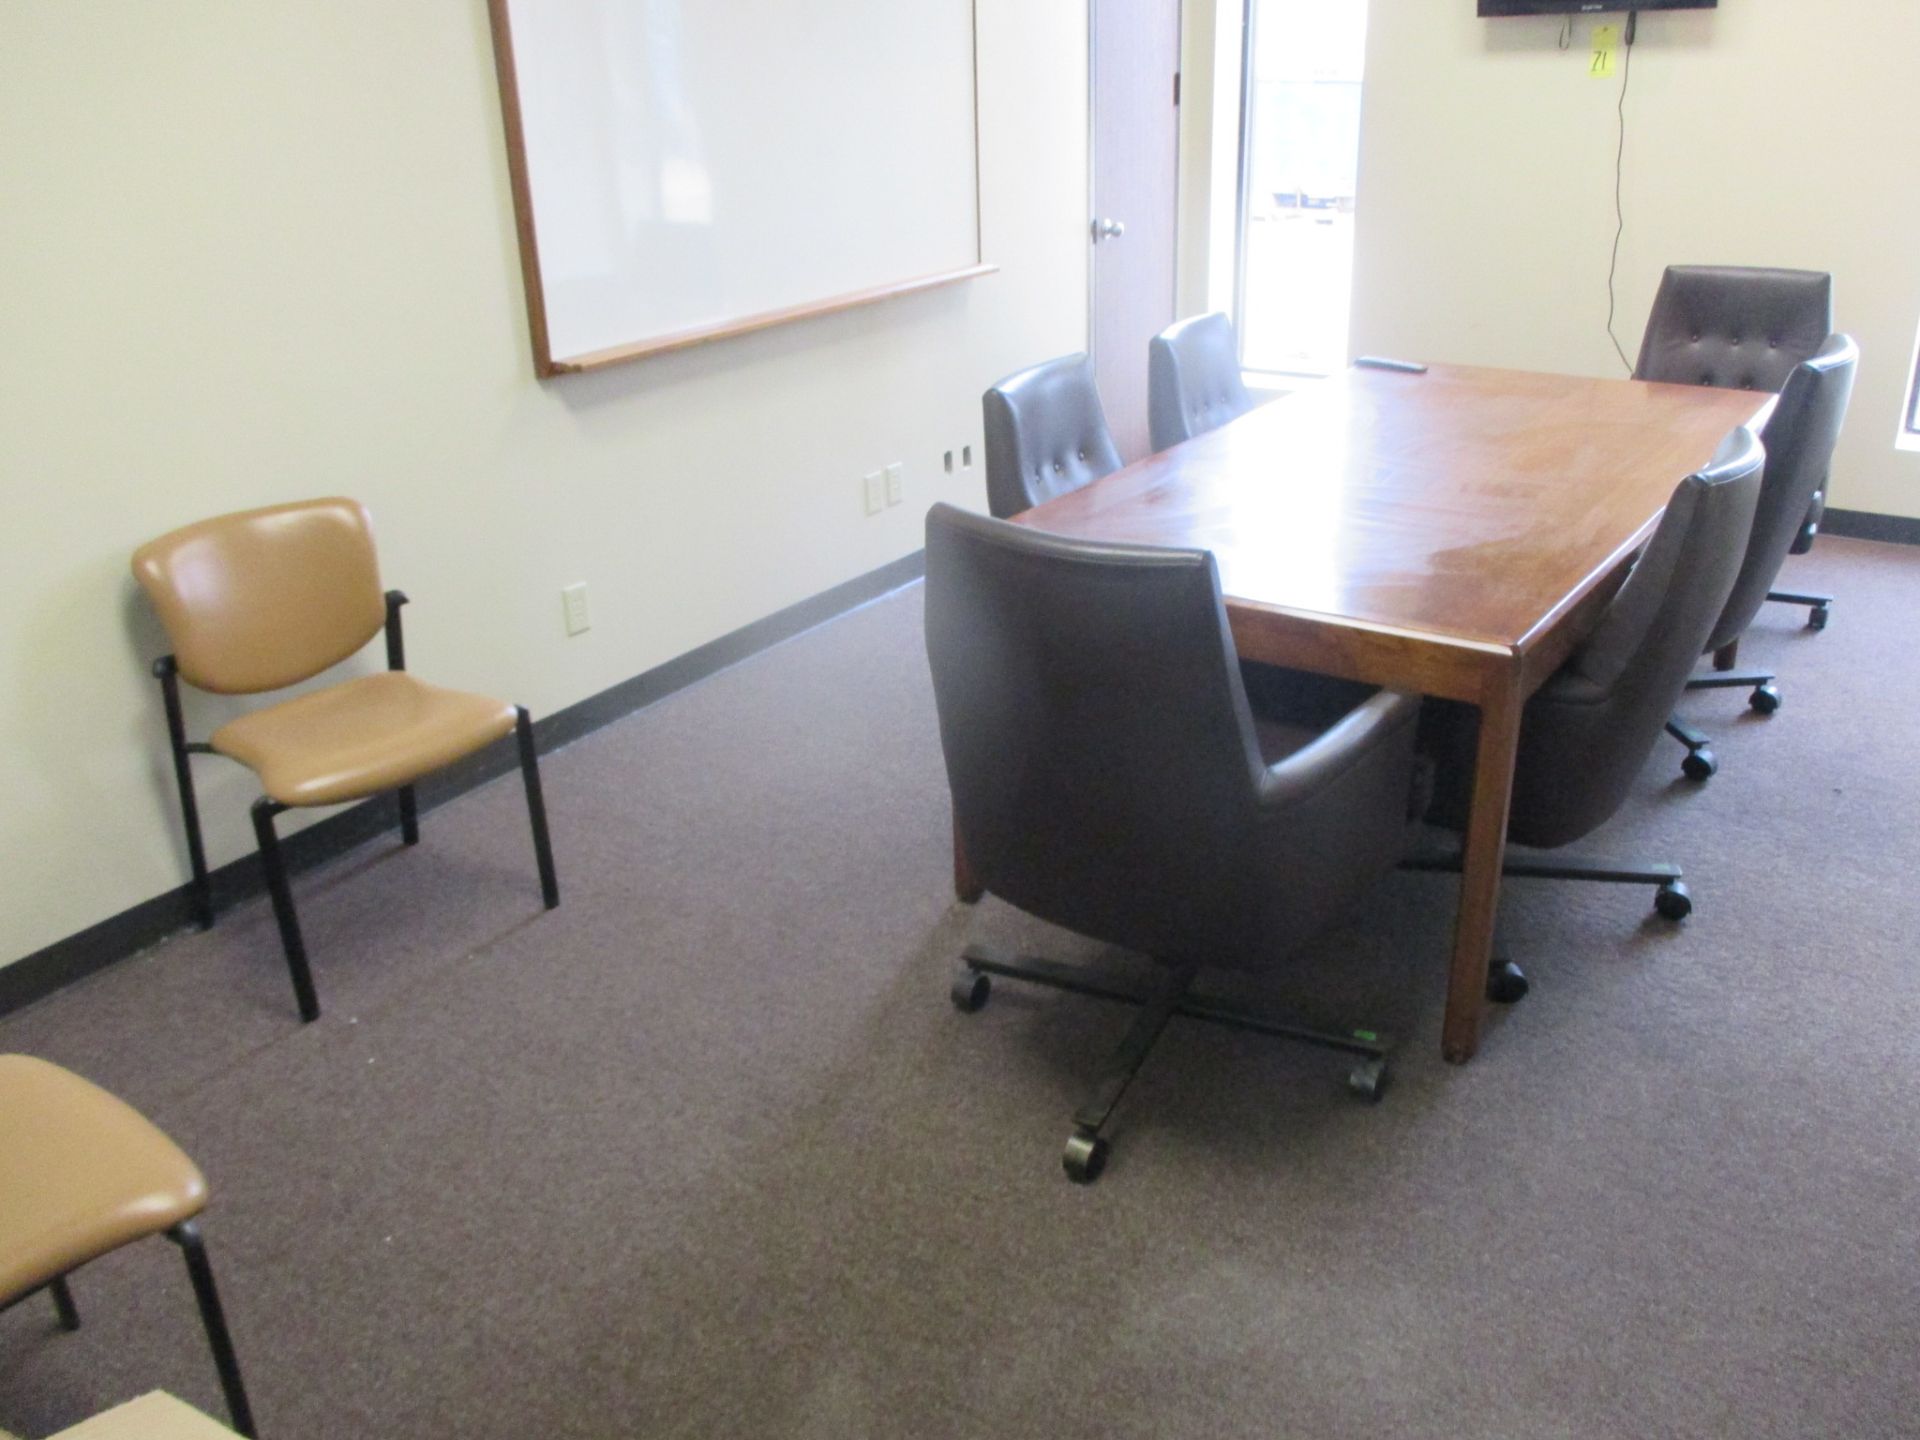 LOT CONTENTS OF OFFICE: conference table